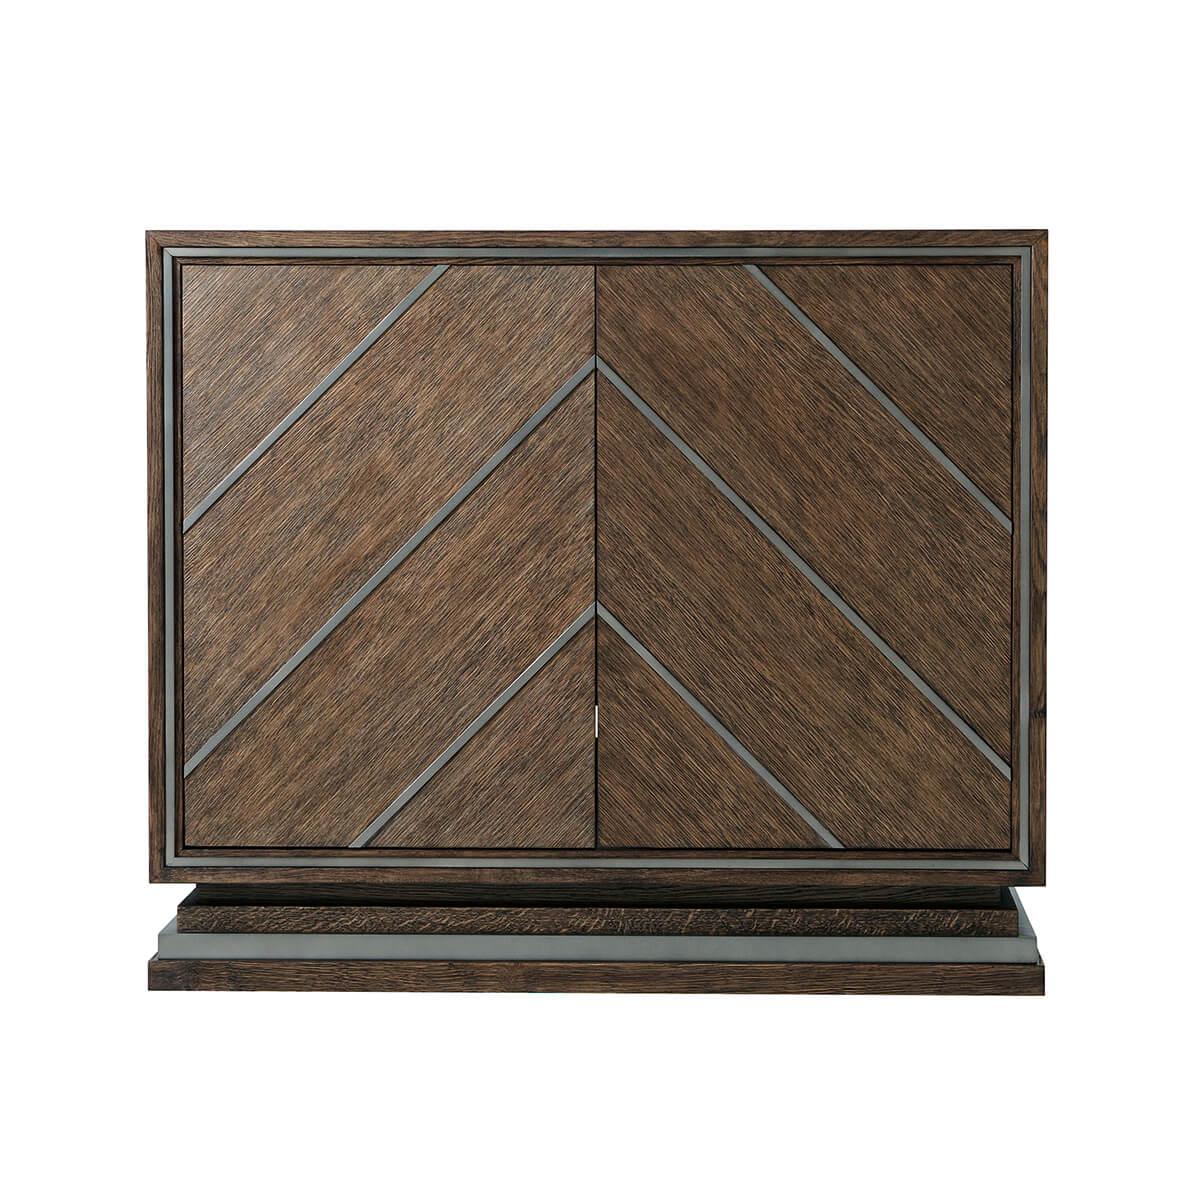 A modern Chevron design cabinet with brushed quarter oak veneer in our Charteris finish, two doors with matte tungsten finish chevron overlays enclosing two adjustable shelves and raised on a stepped inset base. 

Dimensions: 40